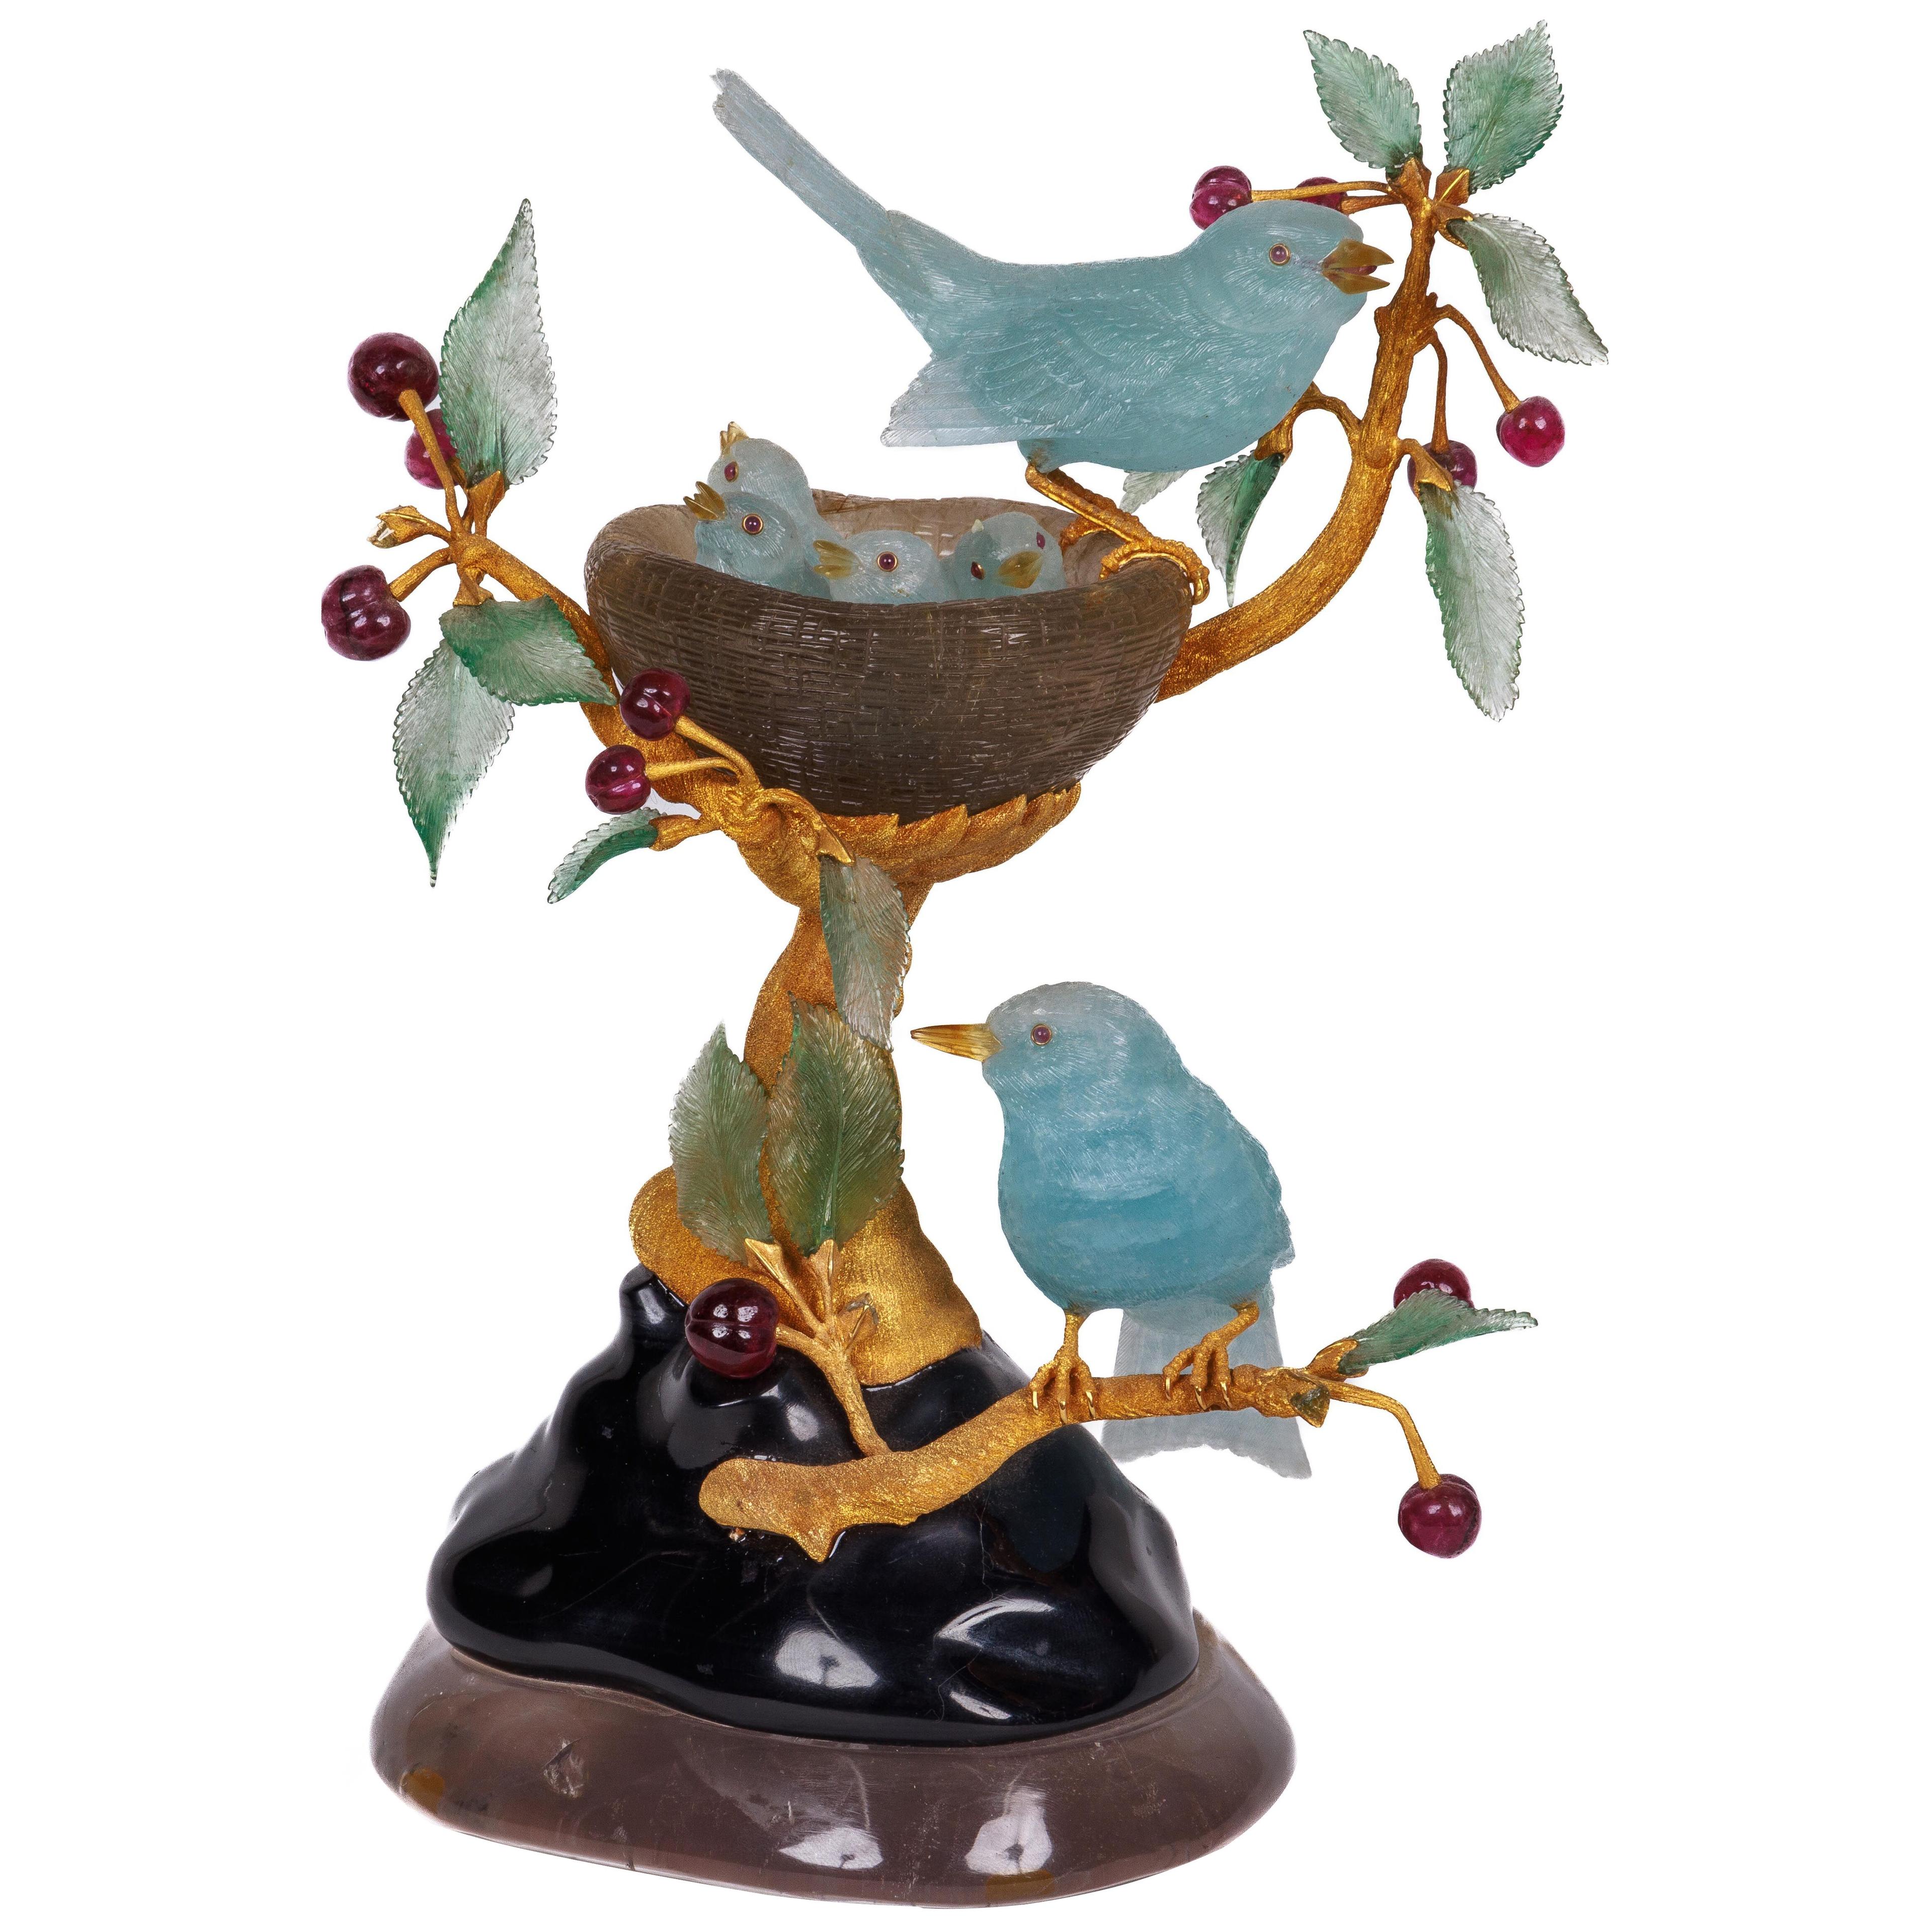 14K Gold, Ruby, and Aquamarine Study, "Birds and Nest in Cherry Tree" by Zadora